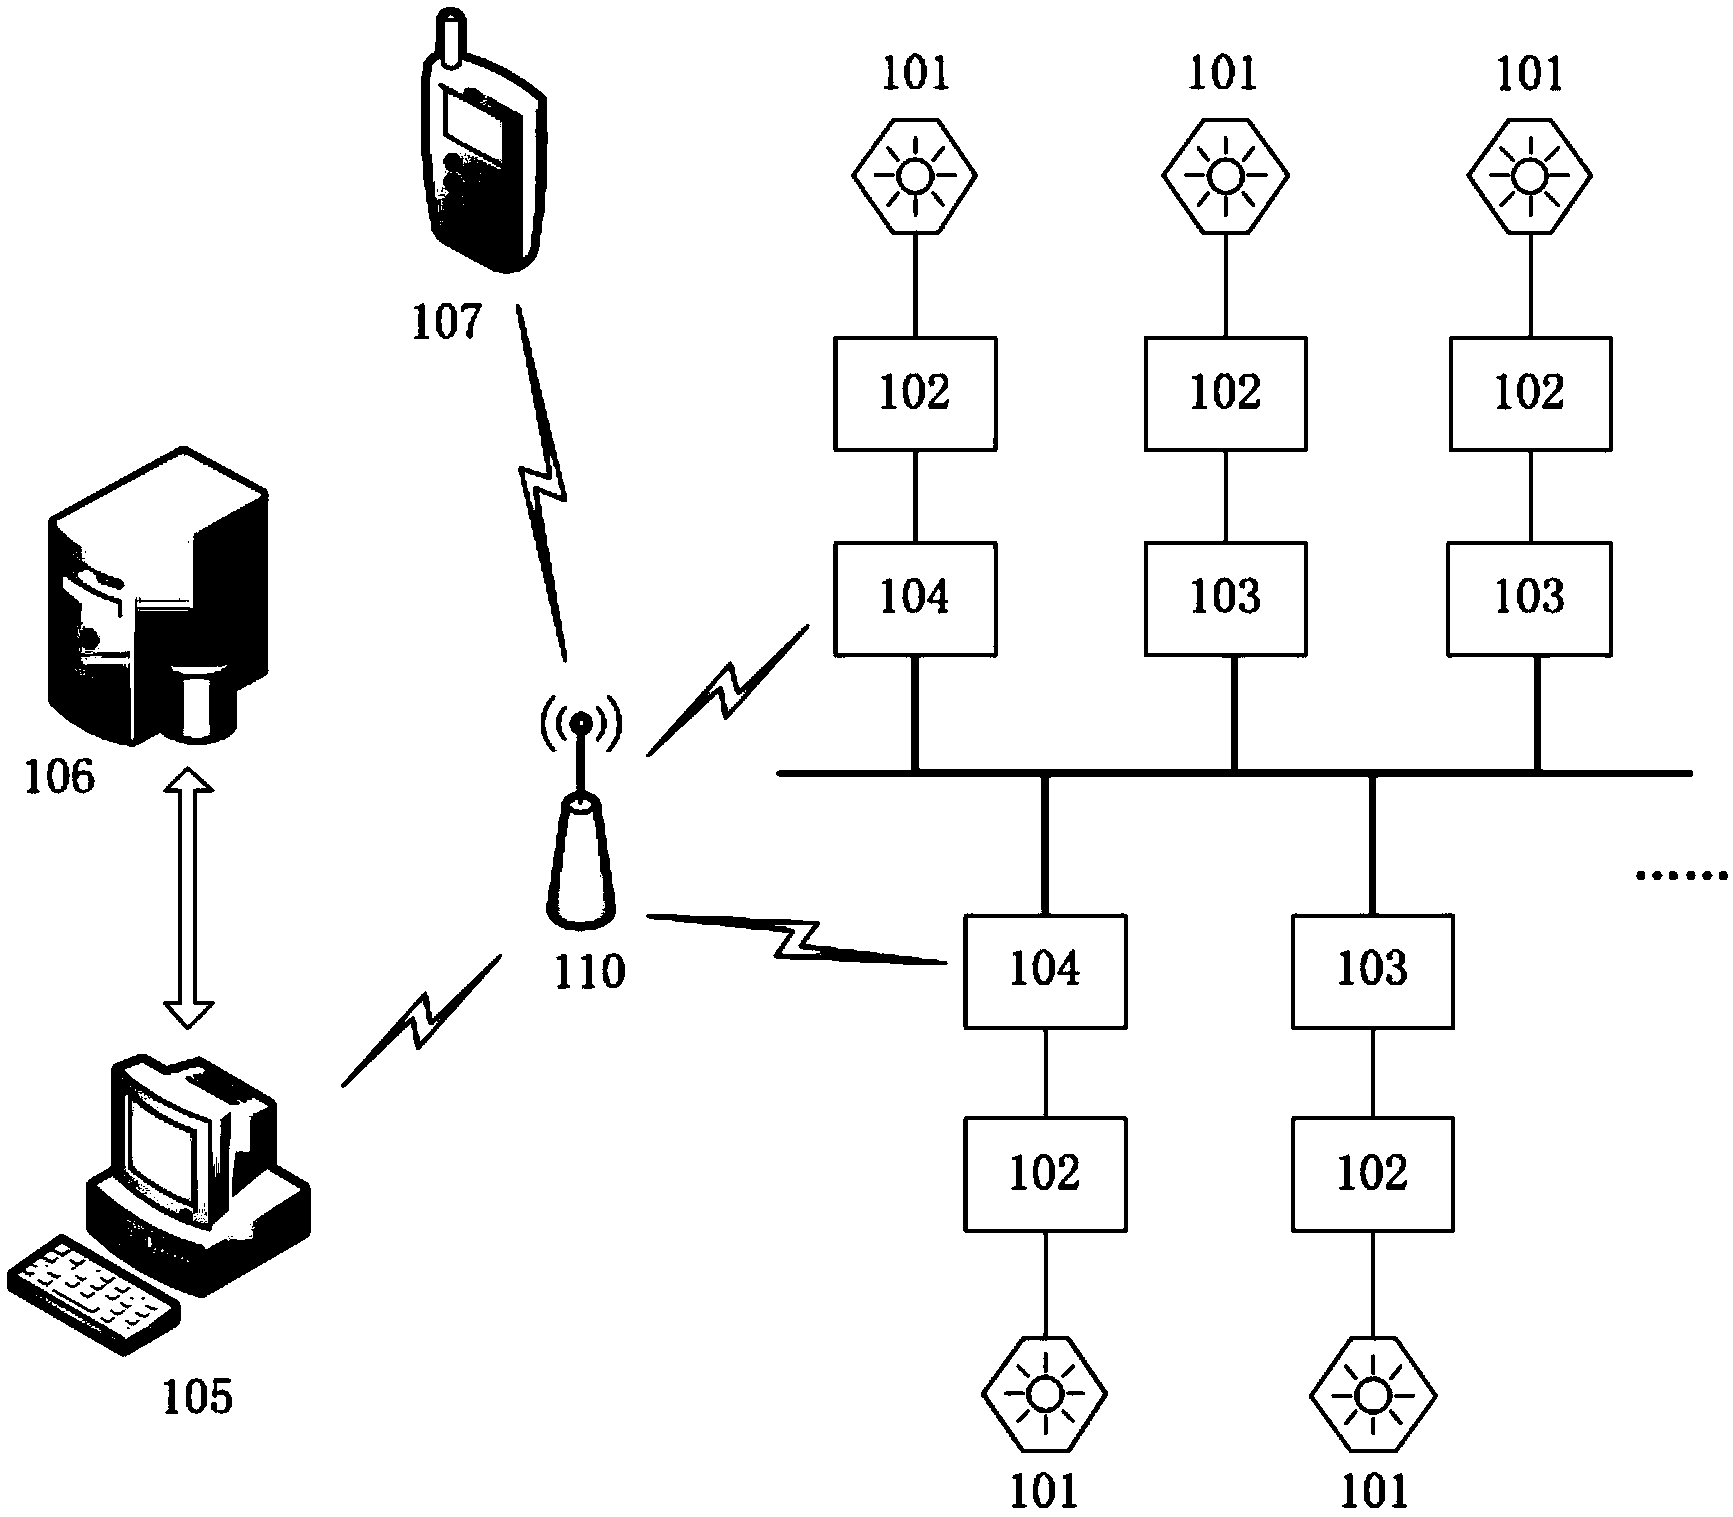 Power line carrier-based intelligent networking control system and method